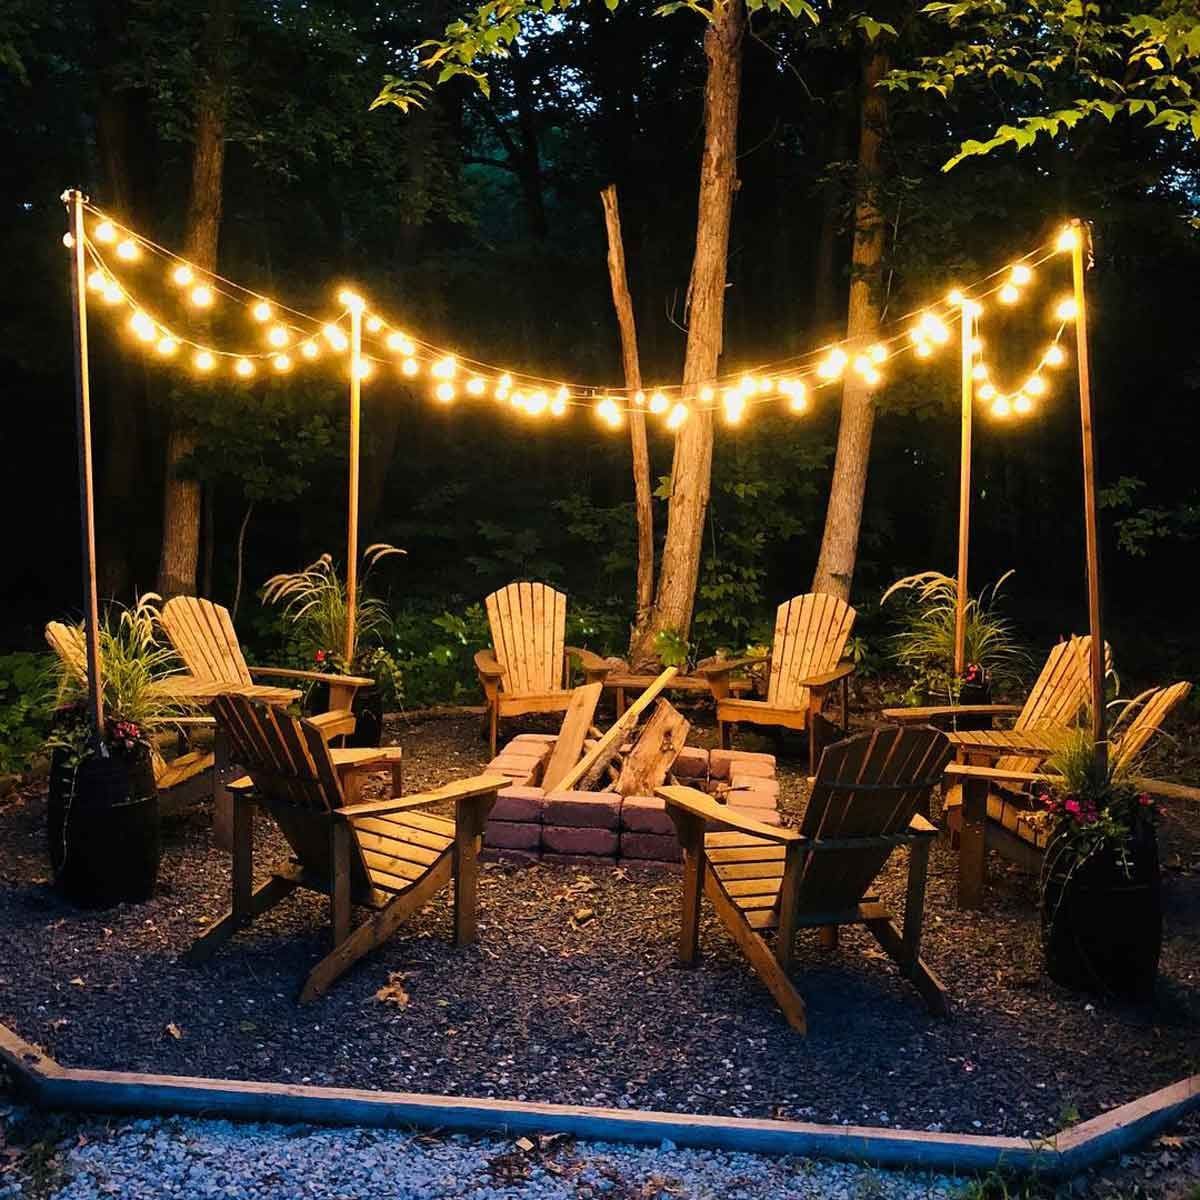 Outdoor Fire Pit with String Lights: Cozy Ambiance for Your Yard插图1